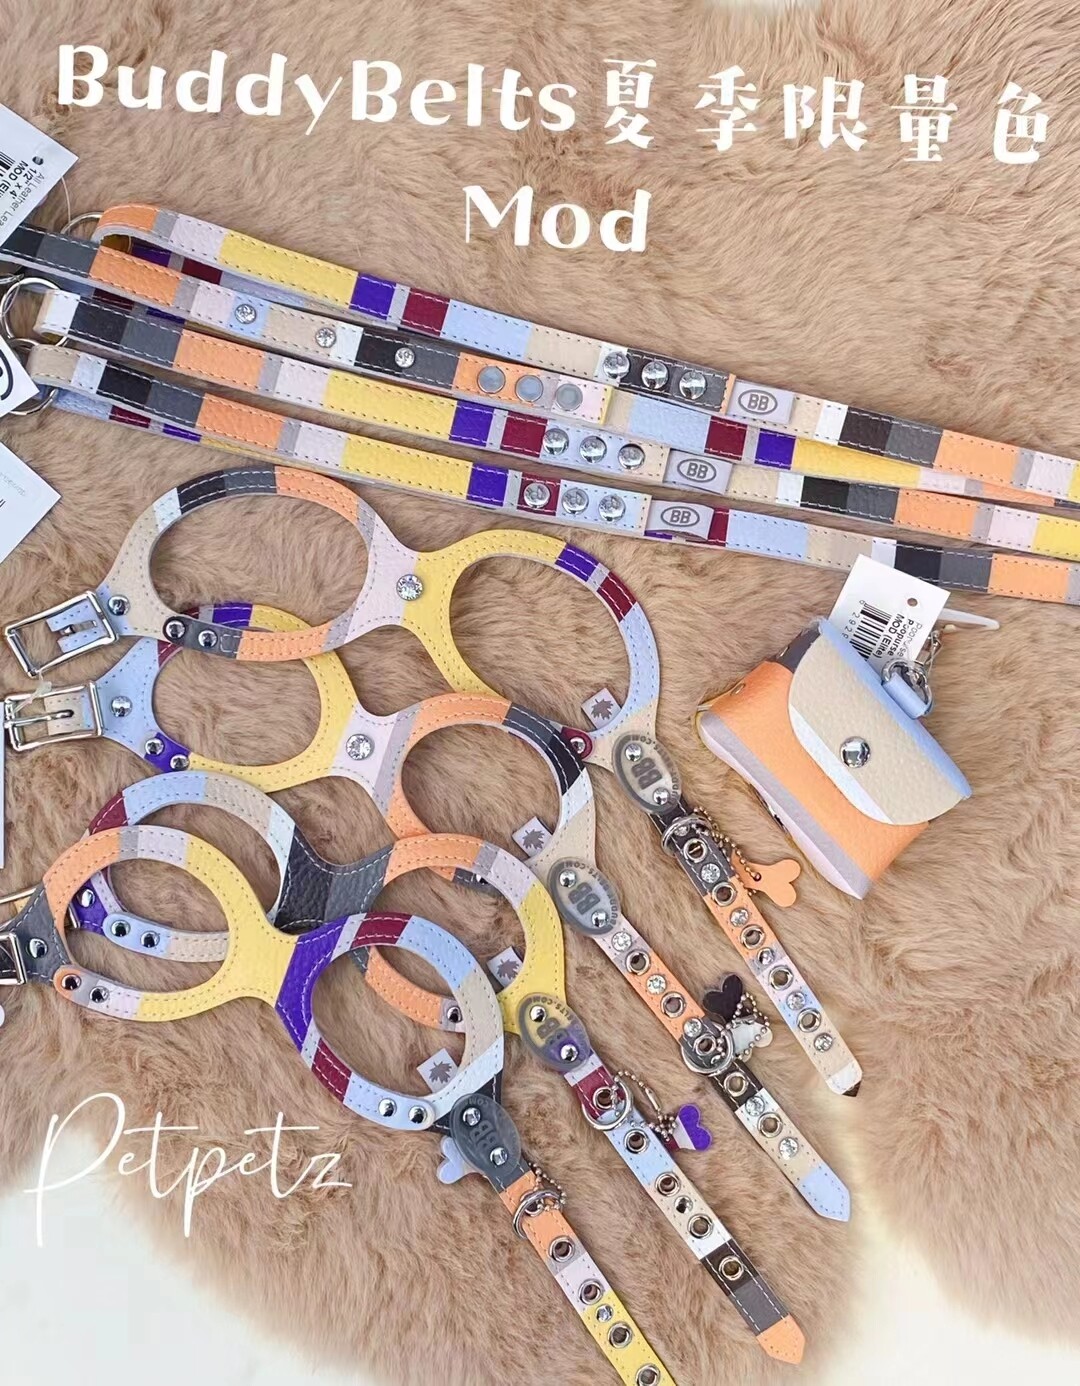 Buddy Belts Poopurse Limited Collection - Mod